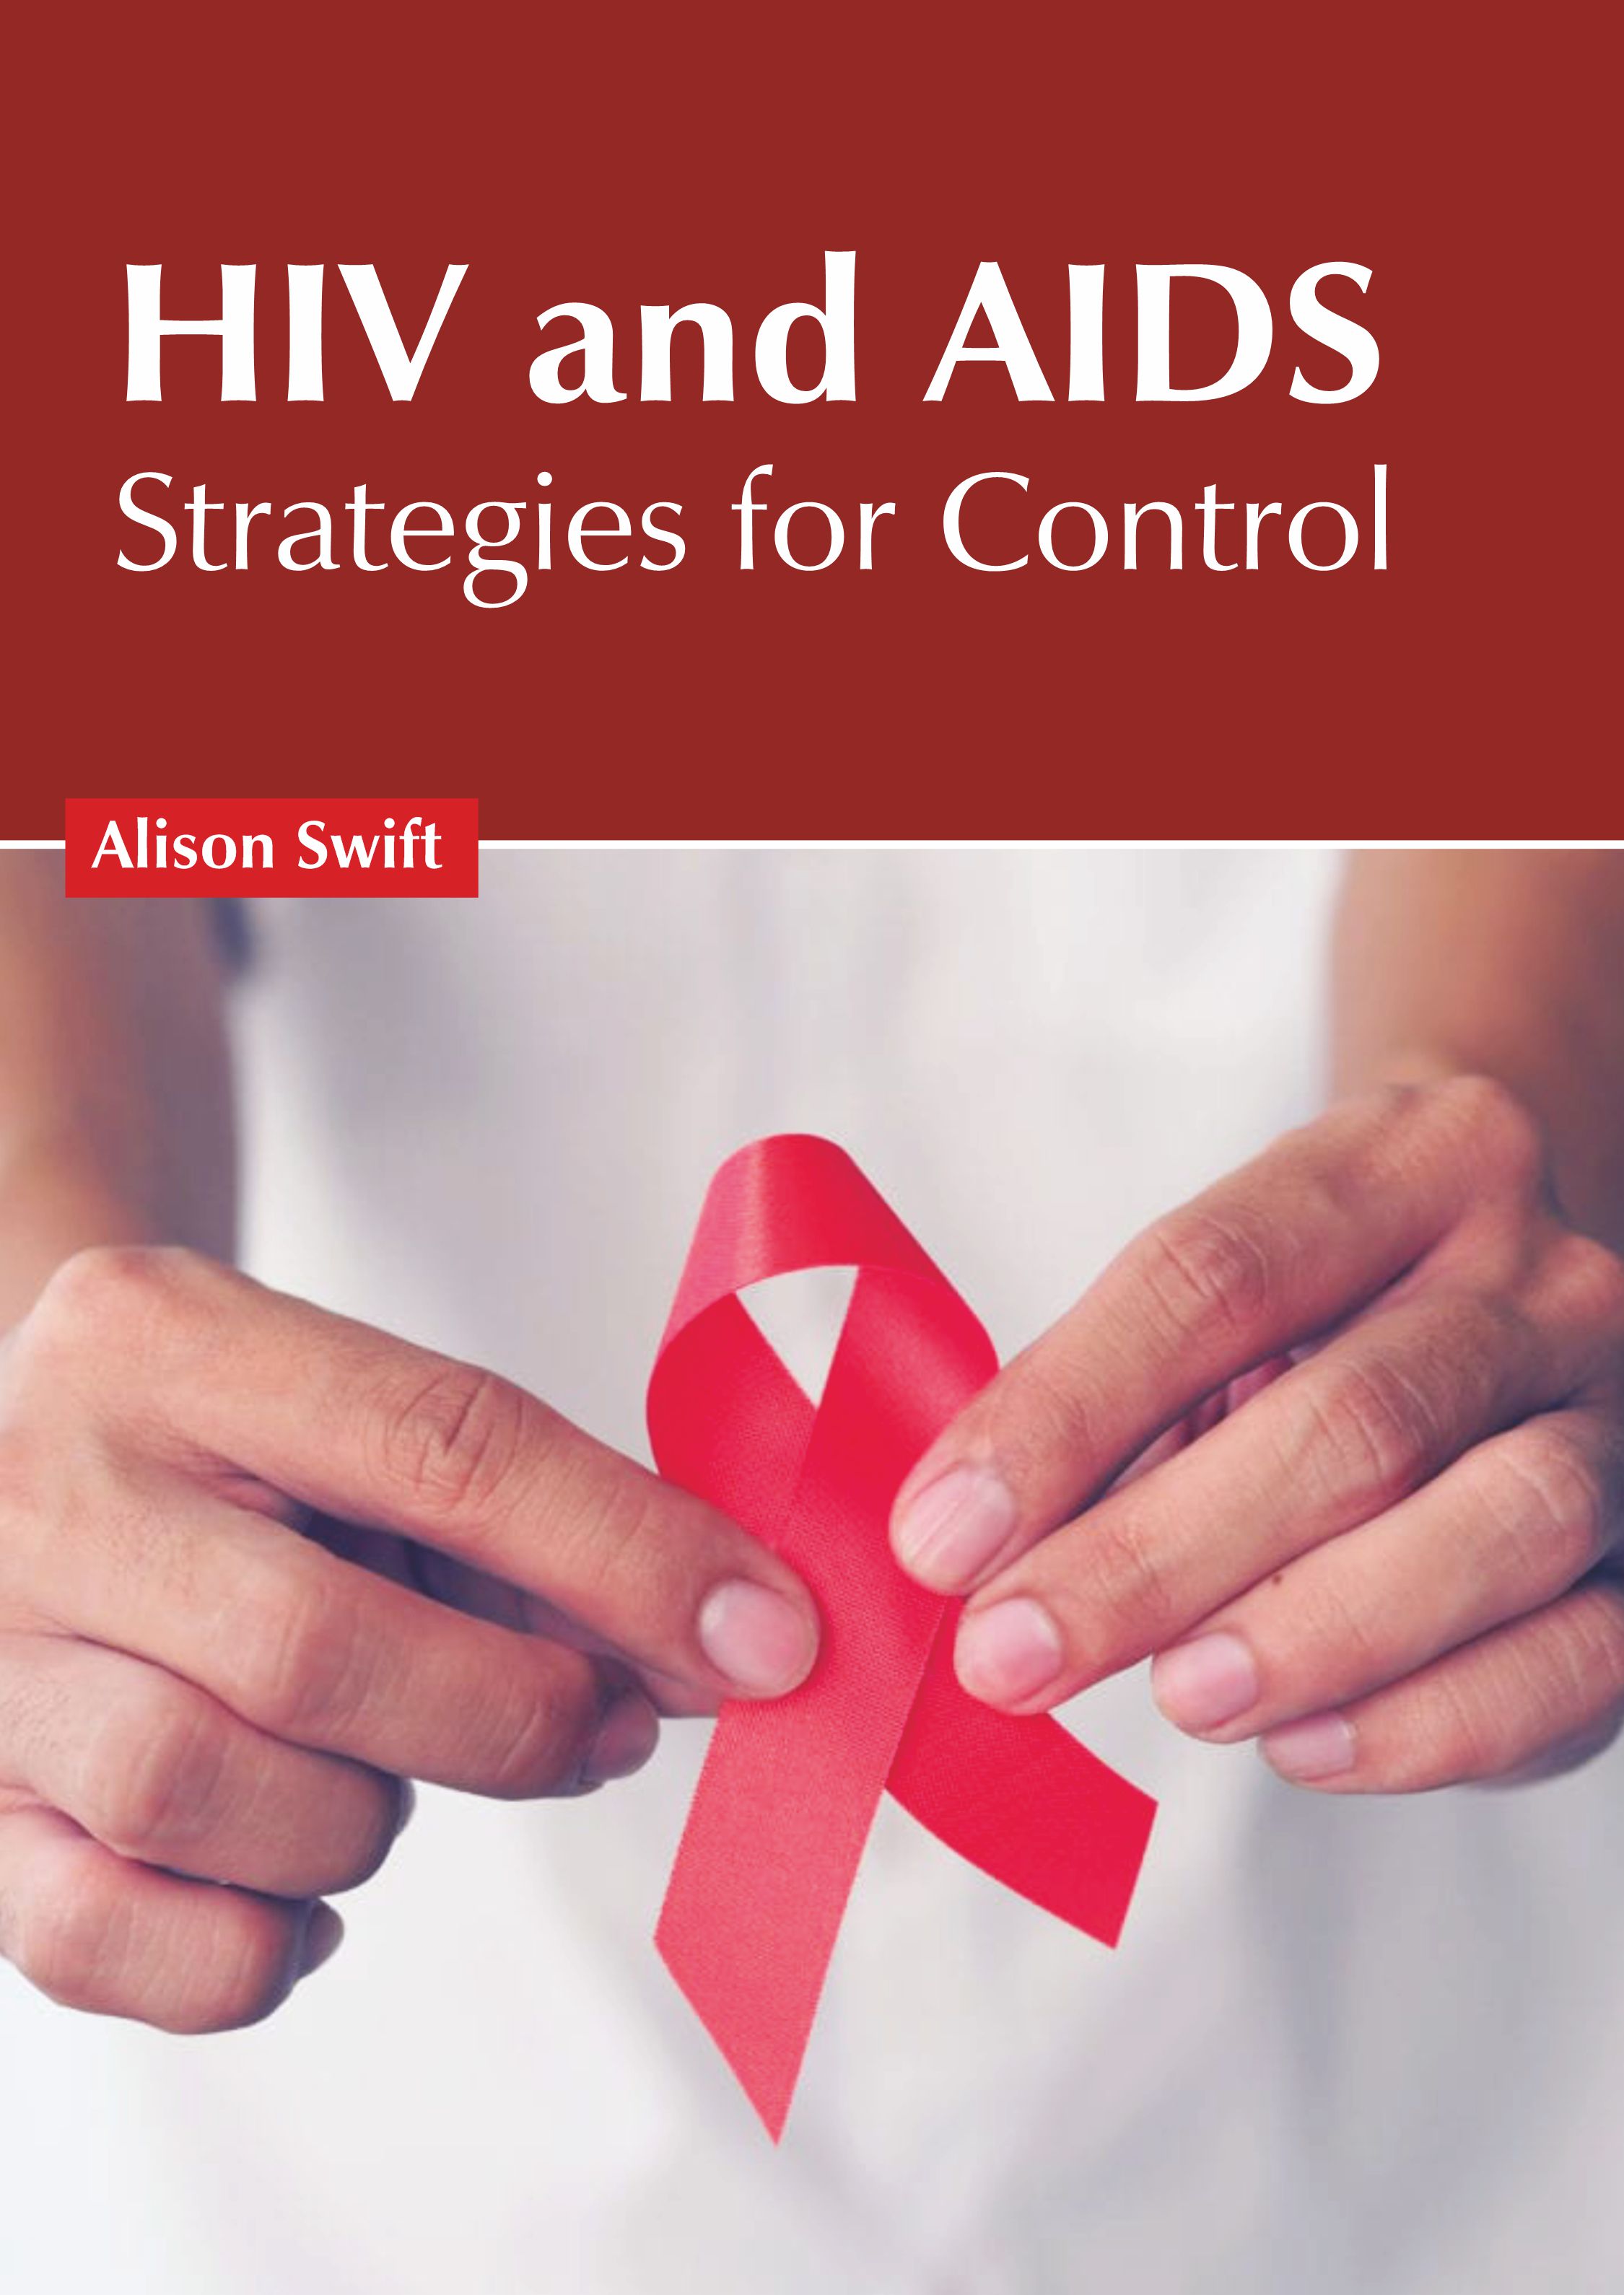 HIV AND AIDS: STRATEGIES FOR CONTROL- ISBN: 9781639272044